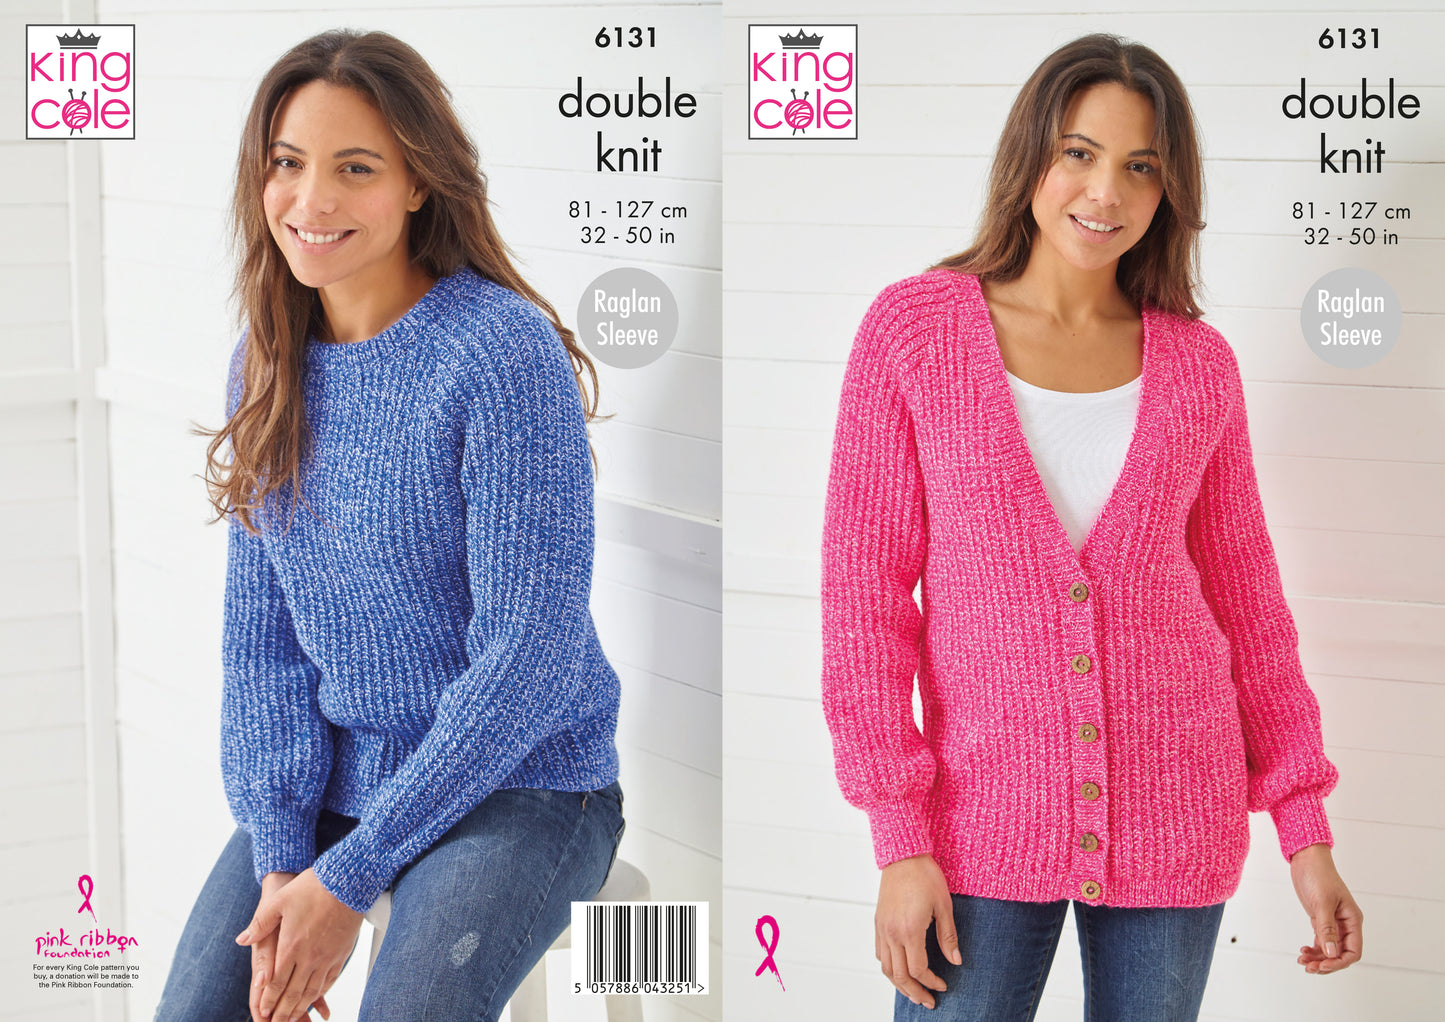 Knitting Pattern 6131 - Sweater & Jacket Knitted in Pricewise Twirly DK